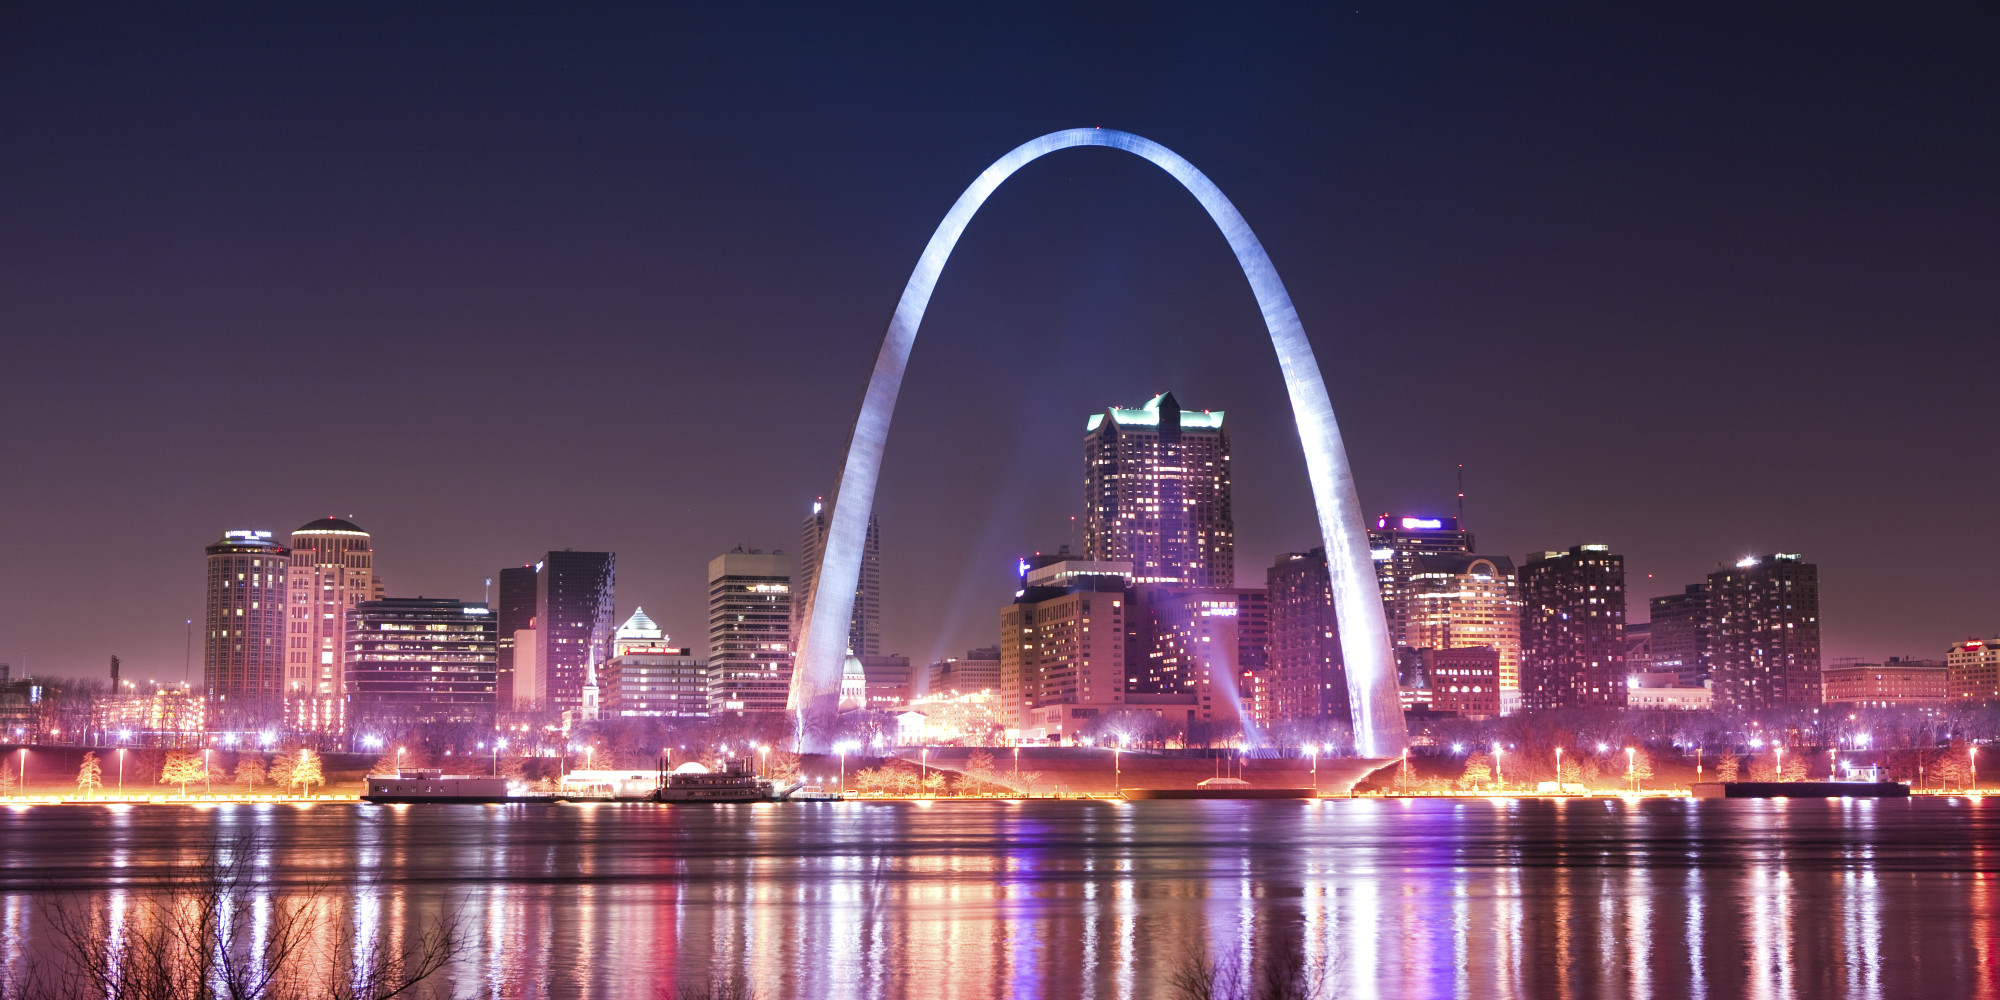 The Gateway Arch St Louis Facts Paul Smith